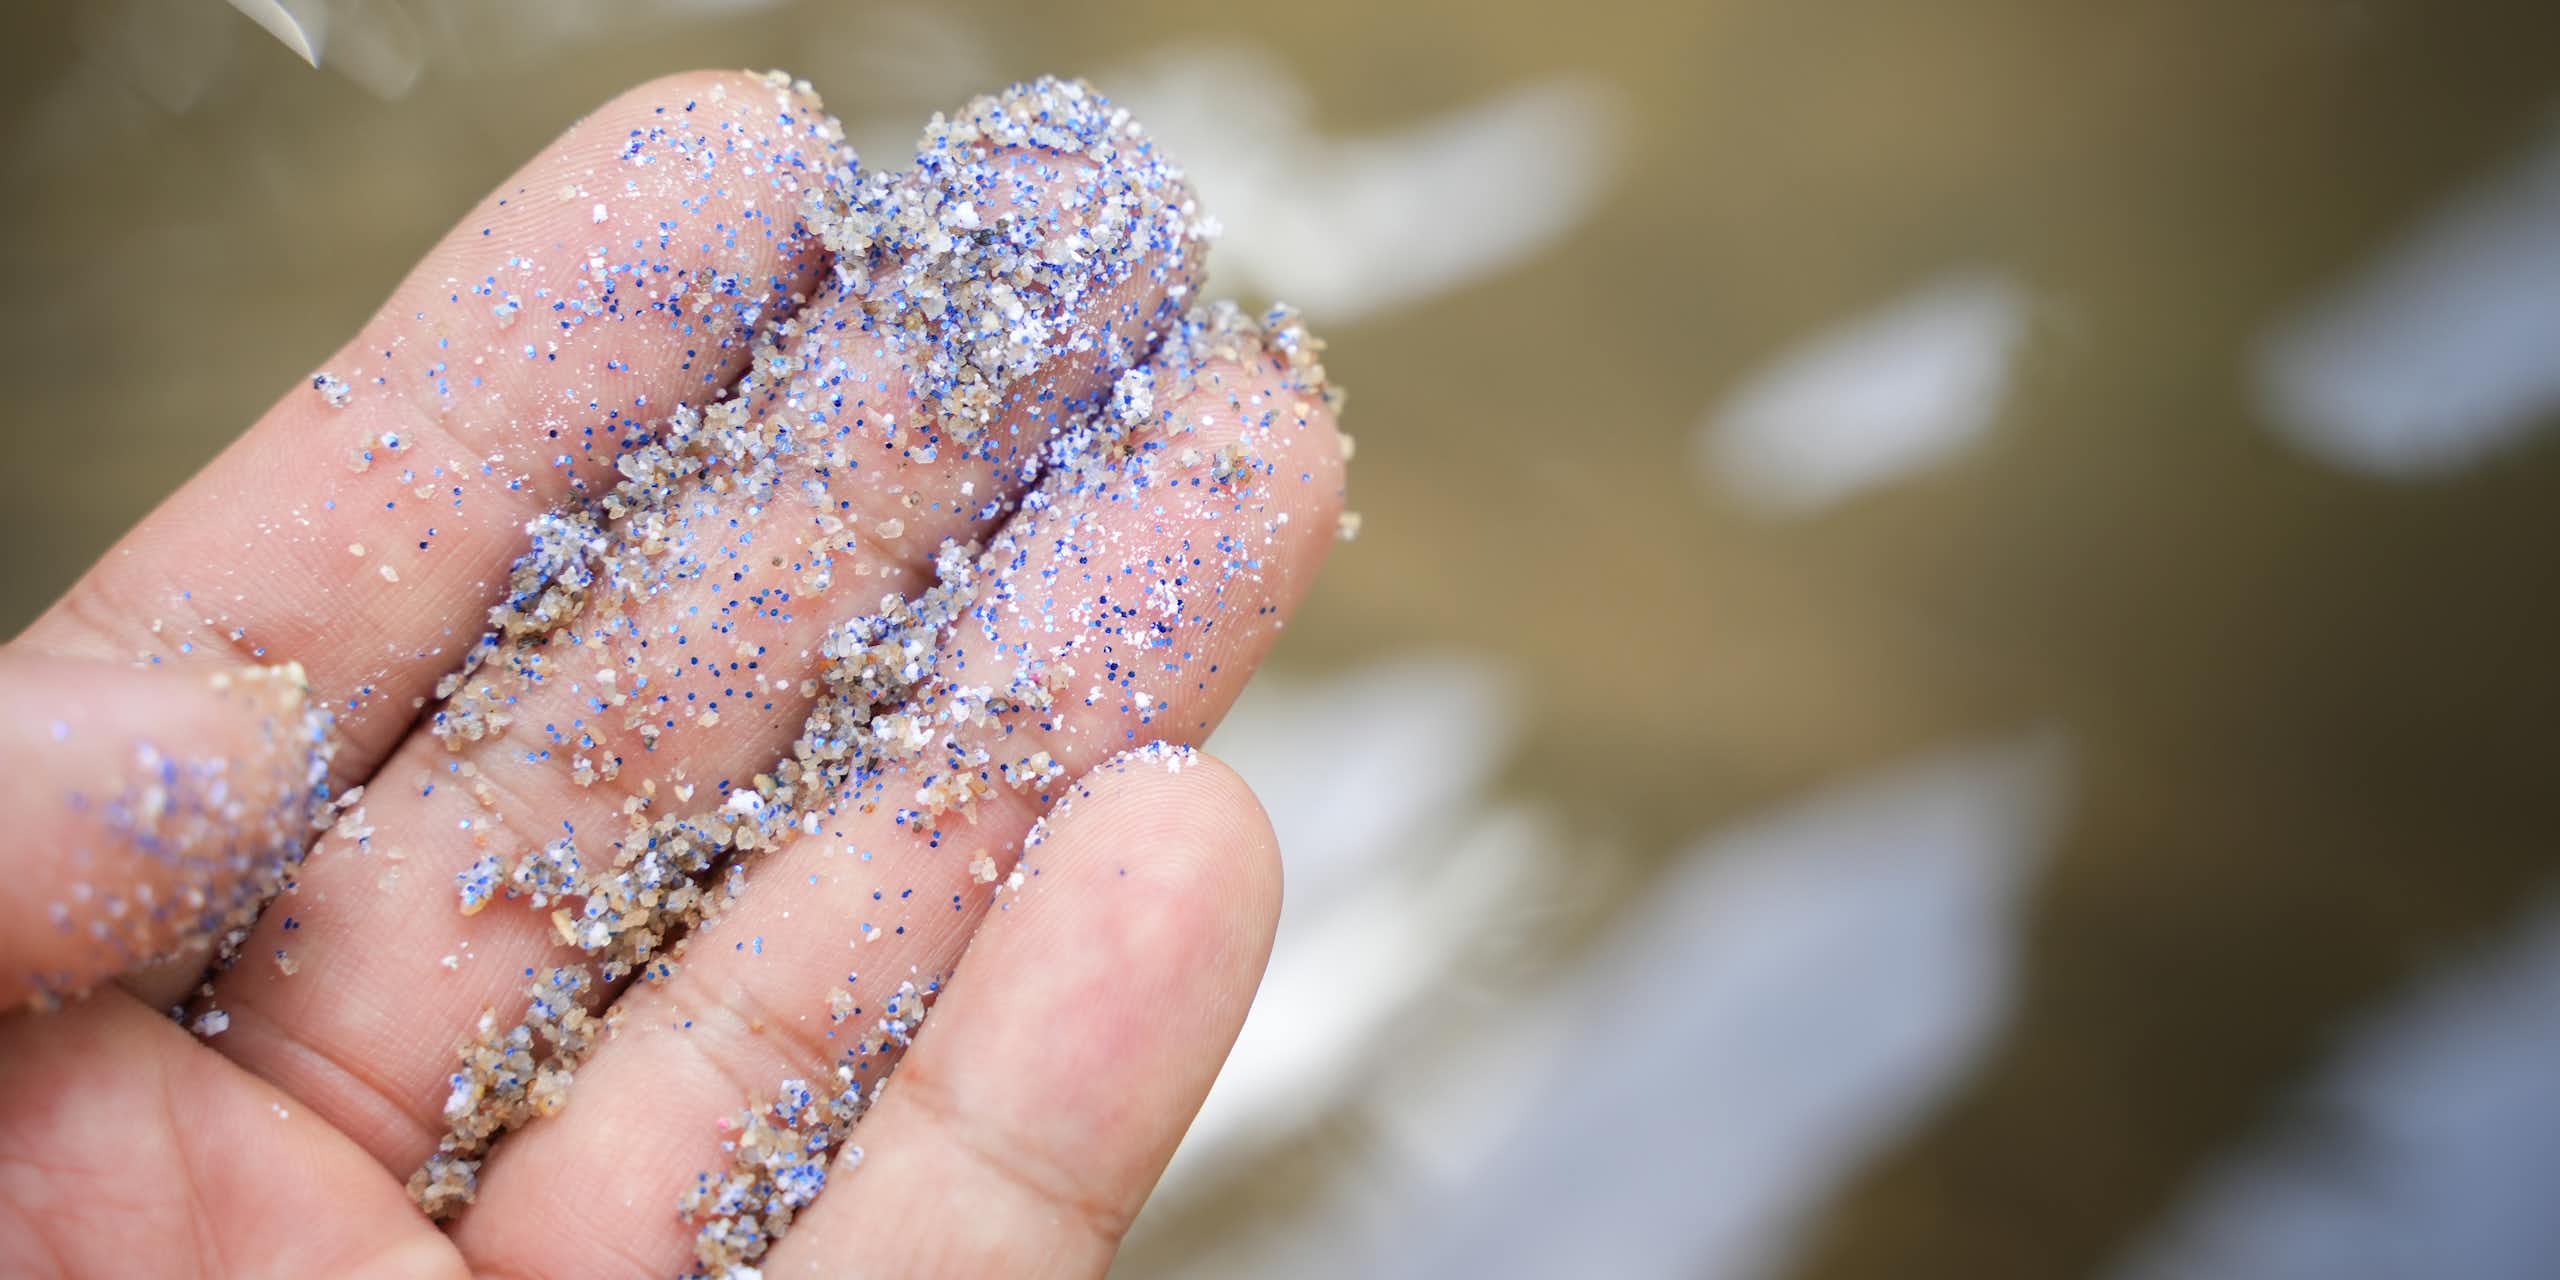 A hand with microplastics on it.